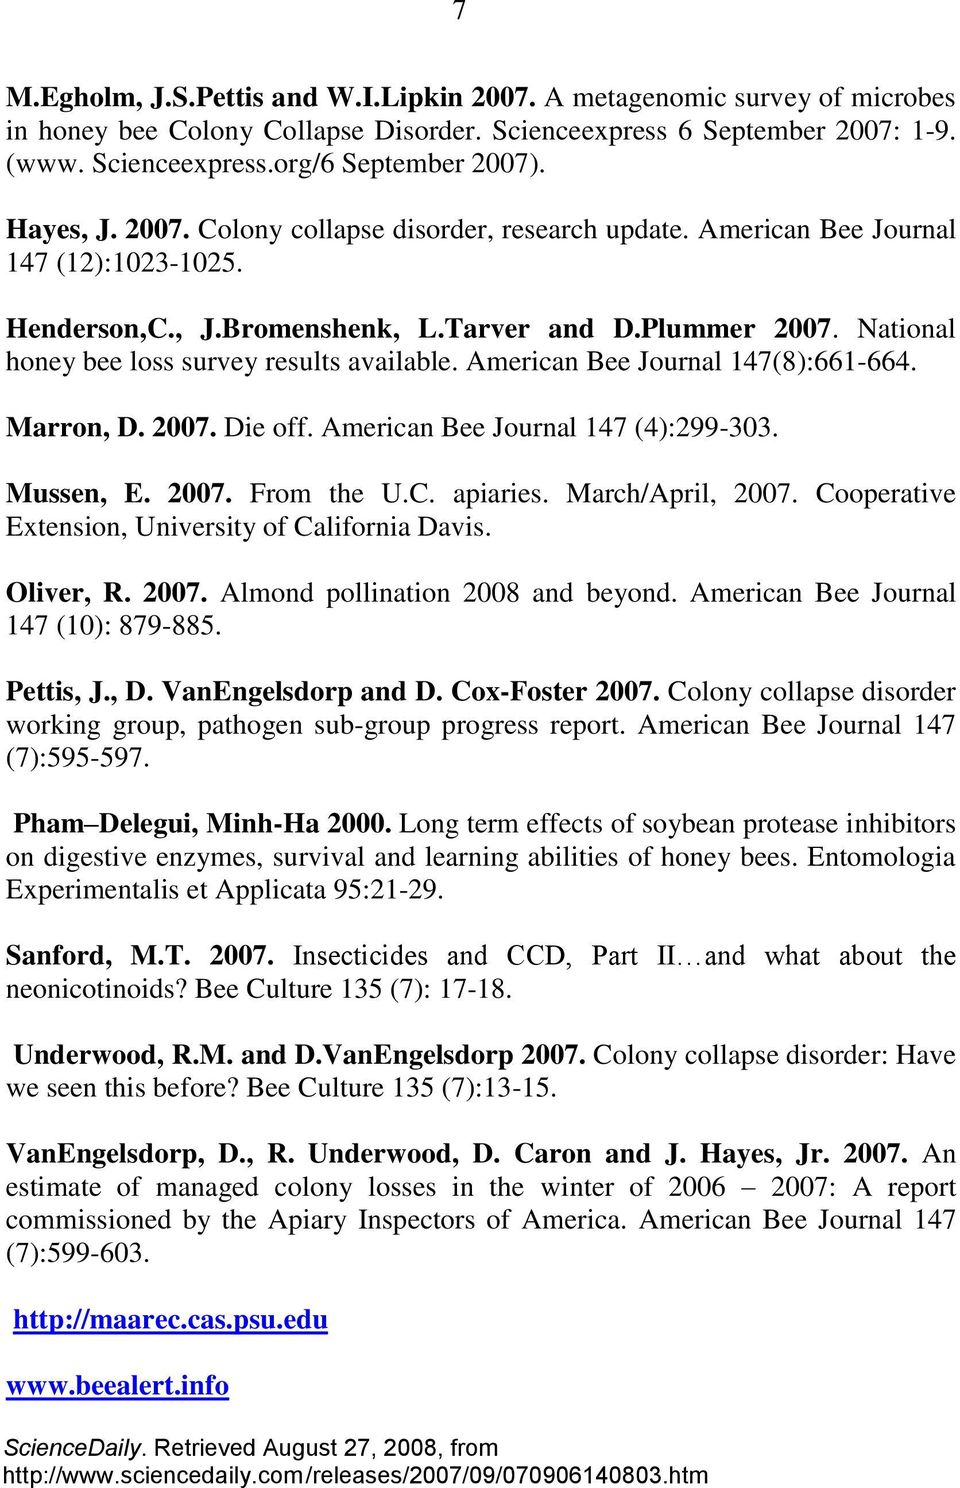 National honey bee loss survey results available. American Bee Journal 147(8):661-664. Marron, D. 2007. Die off. American Bee Journal 147 (4):299-303. Mussen, E. 2007. From the U.C. apiaries.